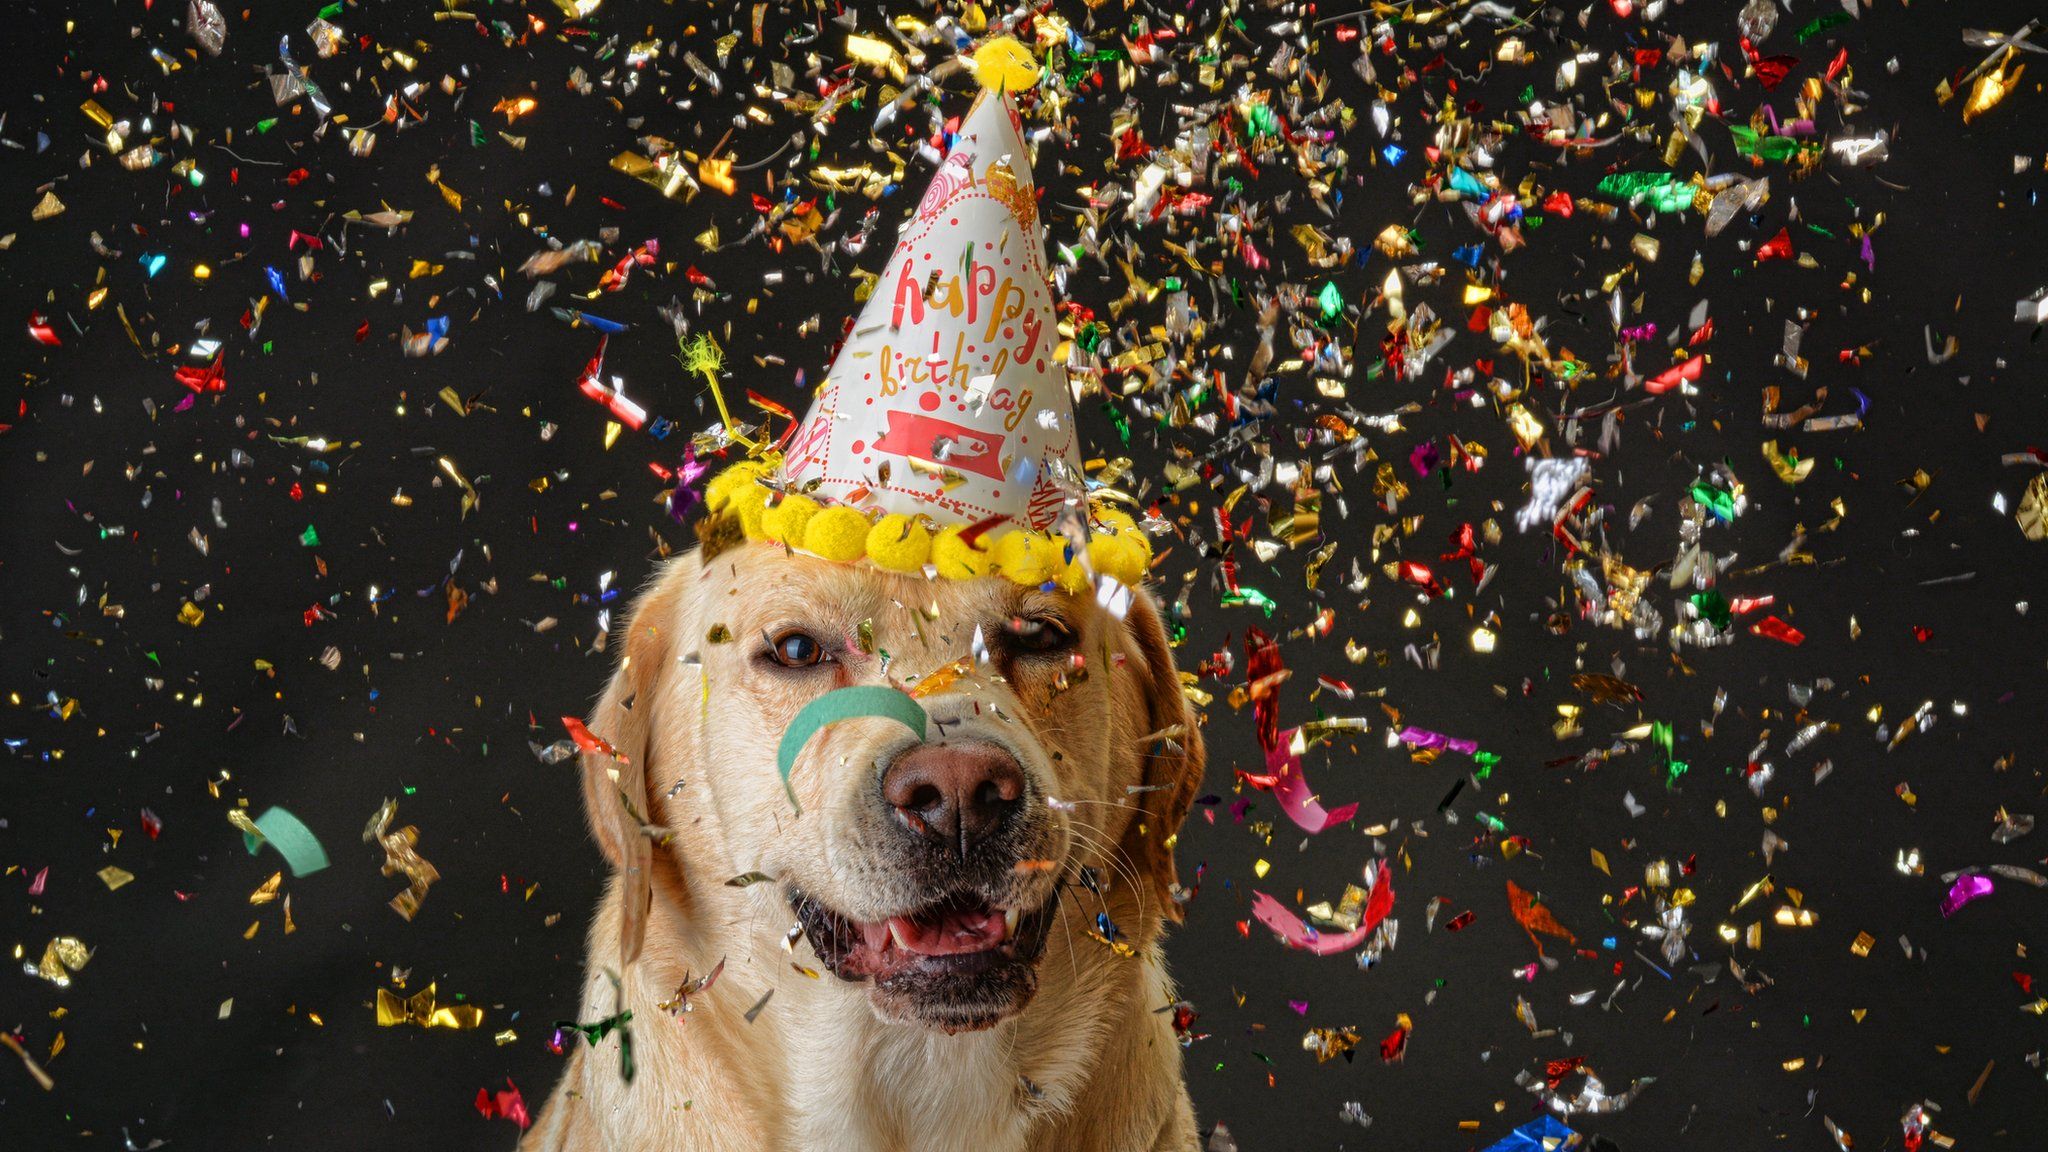 Golden-retriever-wearing-party-hat-surrounded-by-ticker-tape.